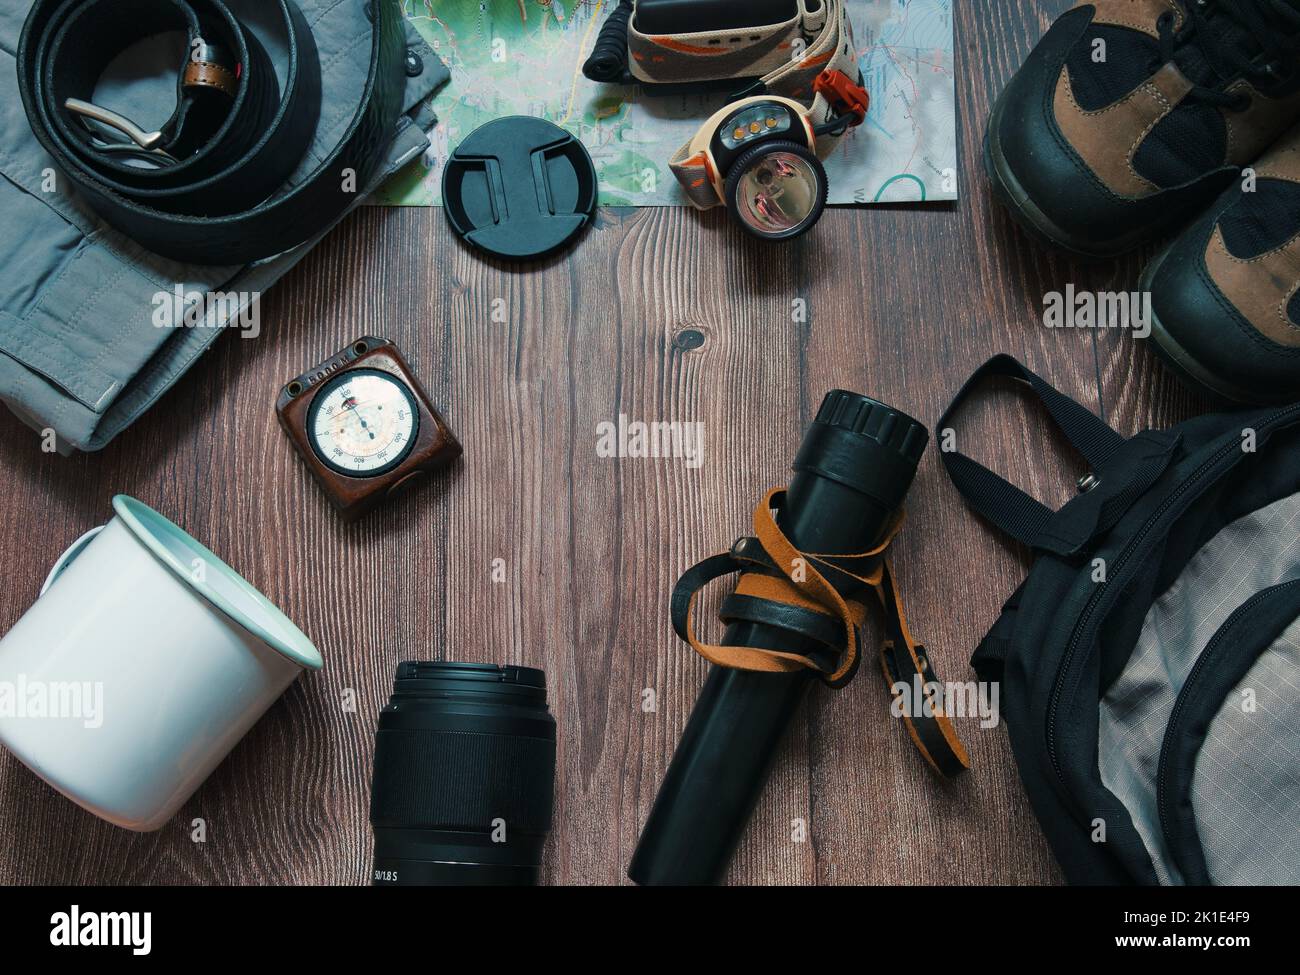 Flat lay of camping gear on a wooden background Stock Photo